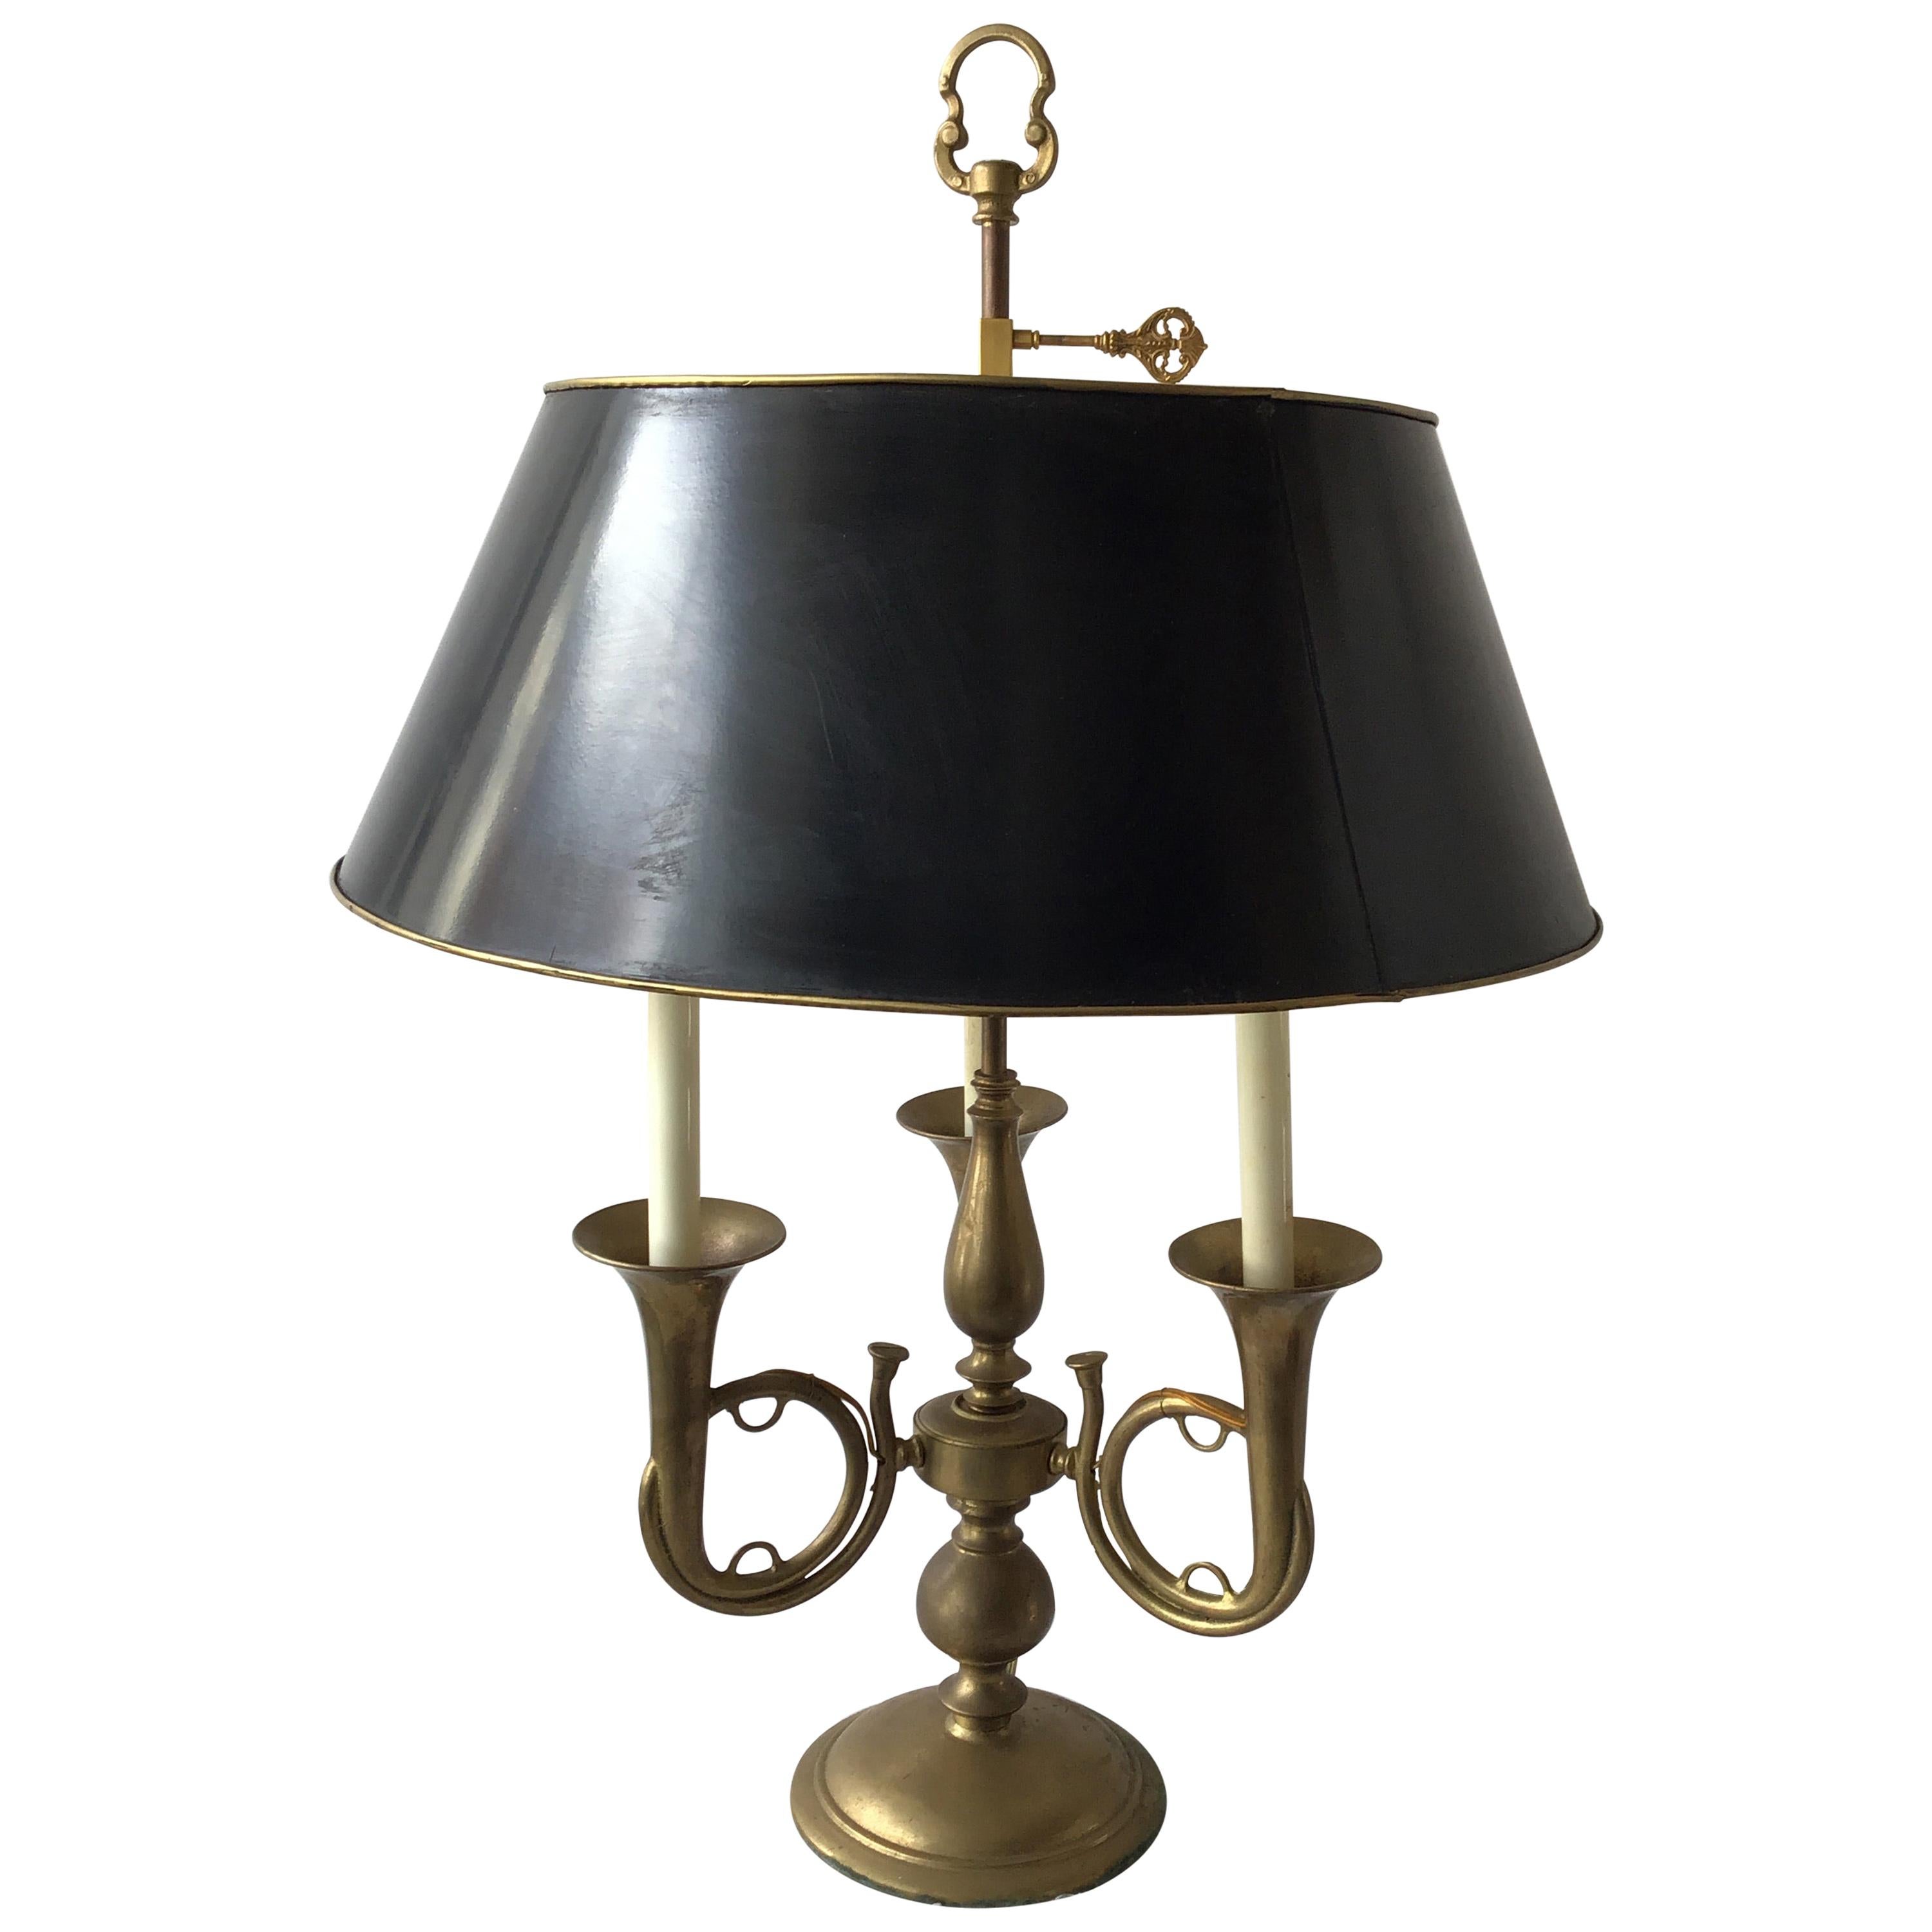 1960s Oversized Brass Trumpet Lamp with Tole Shade